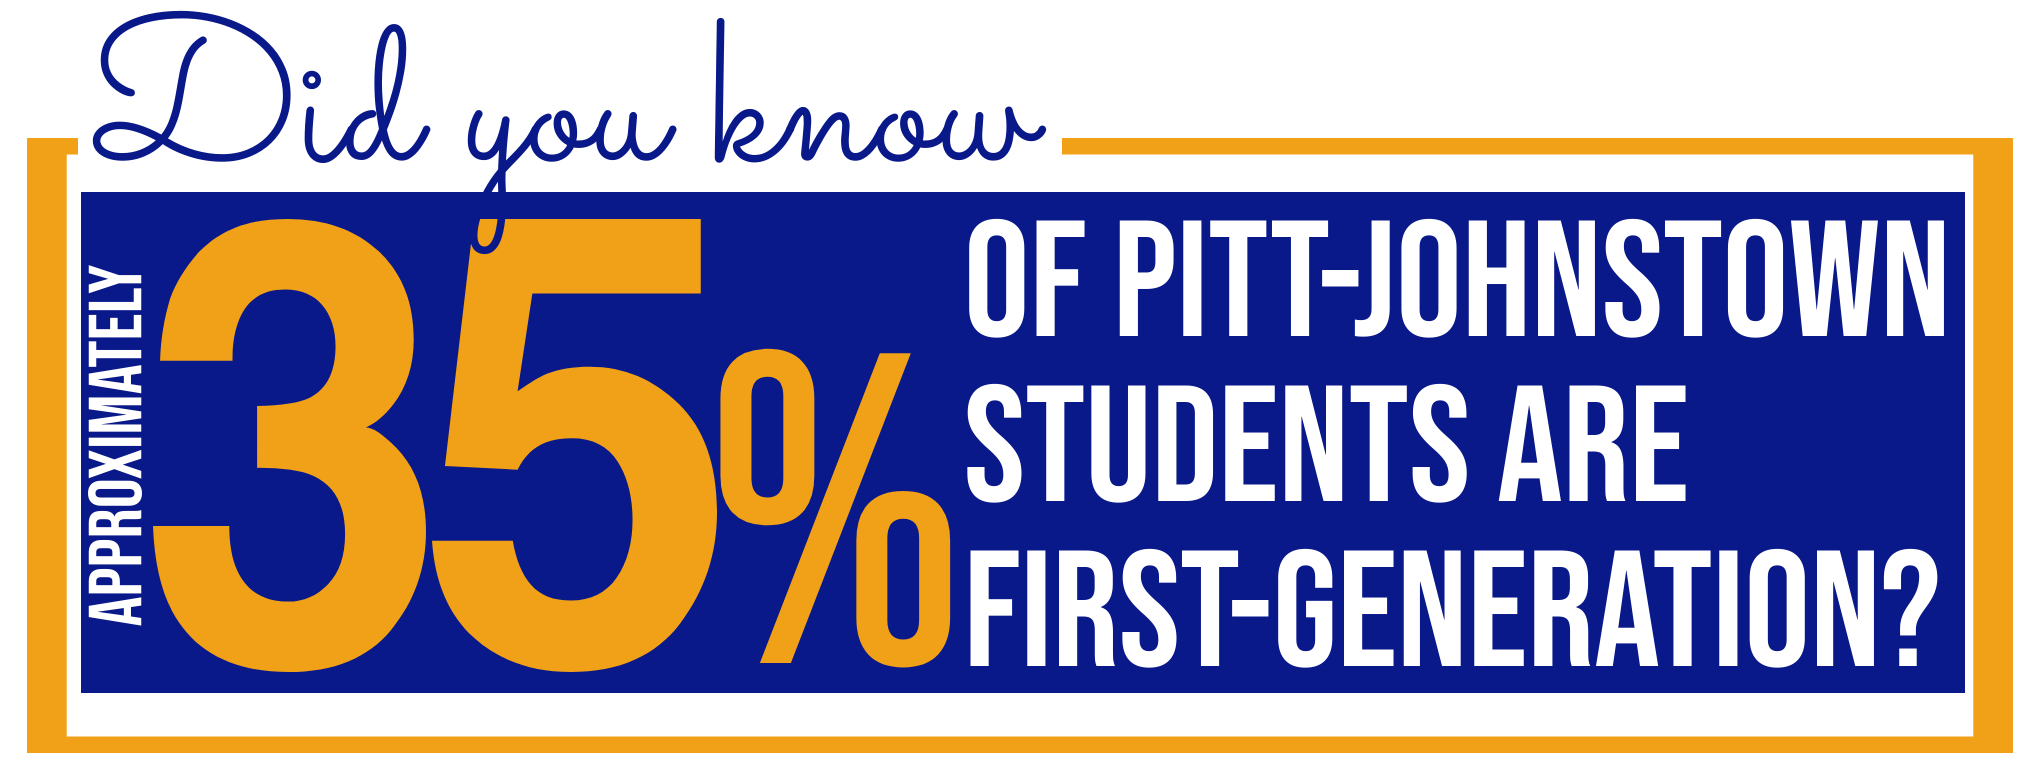 Did you know approximately 35 percent of Pitt-Johnstown students are first-generation?